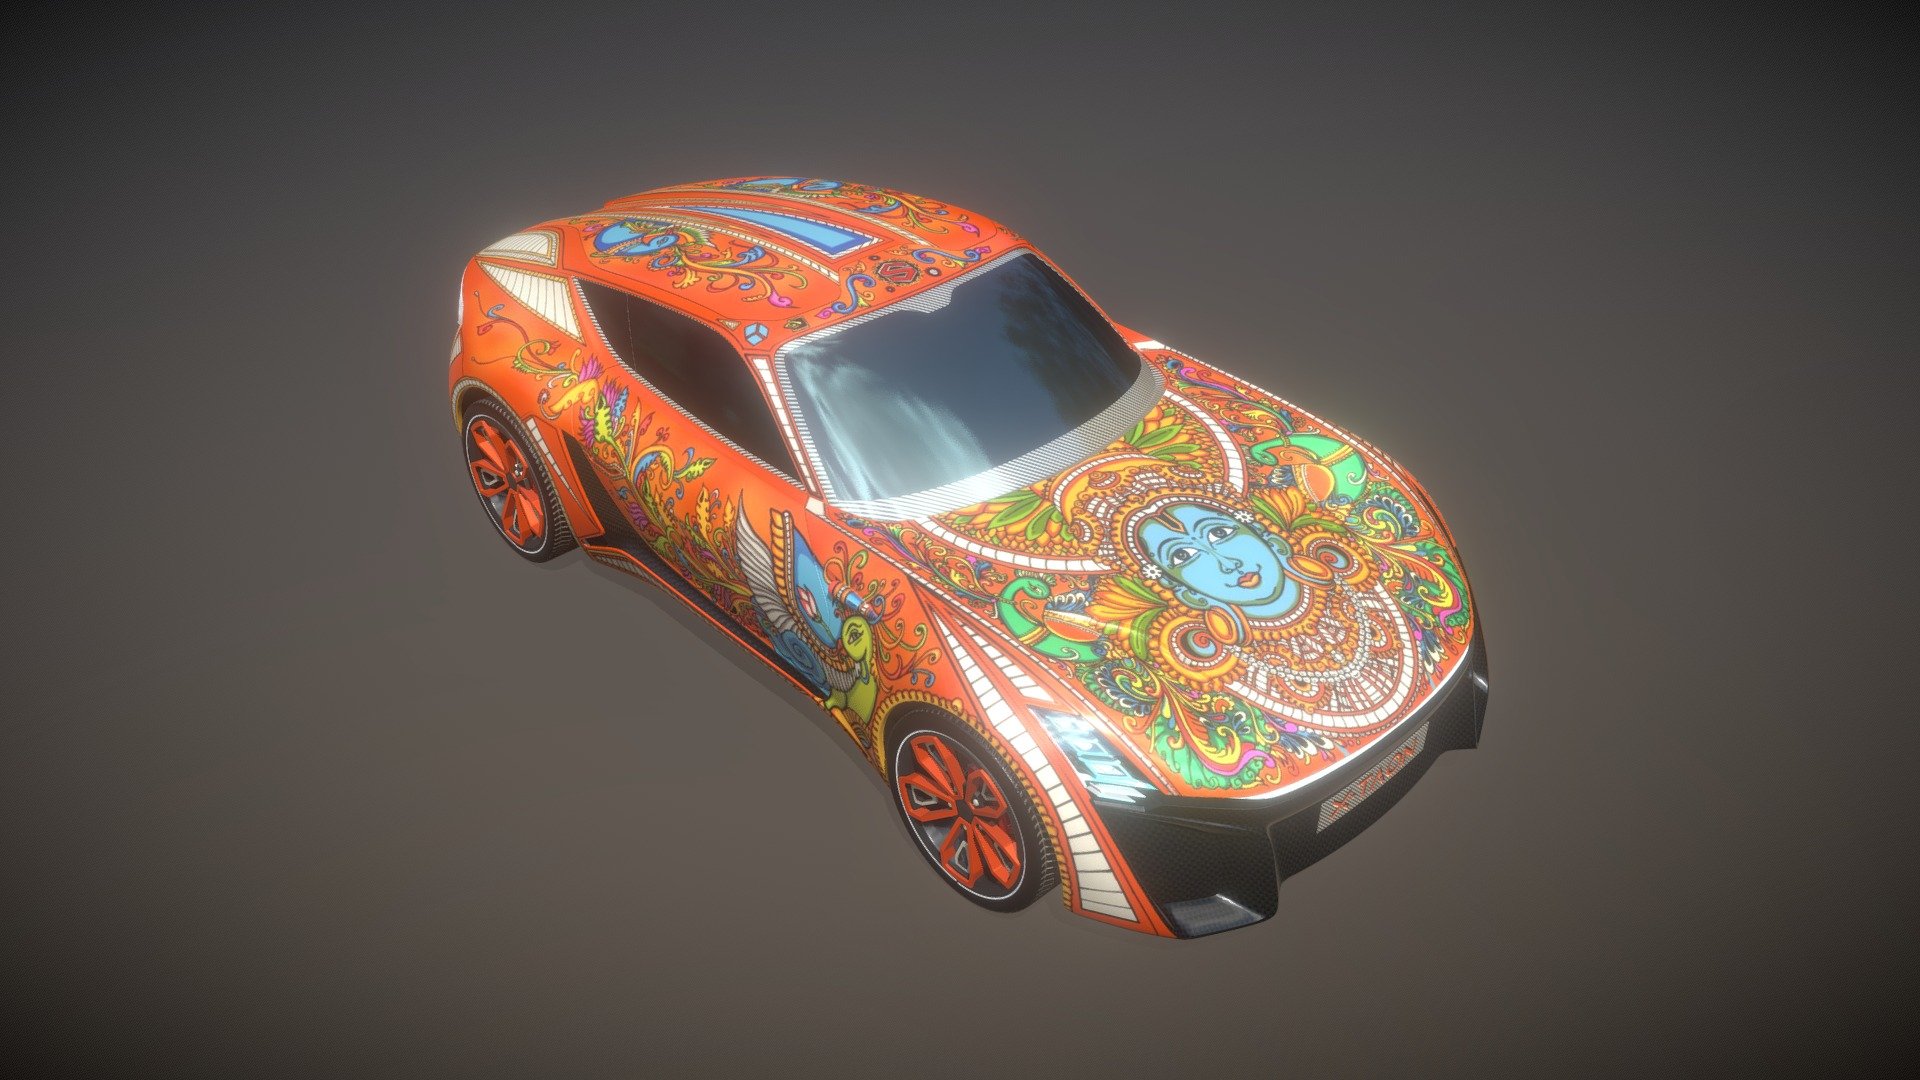 Done for Allegorithmic  X-TAON: The Art Car Texturing Contest powered by susbtance painter.
Themed on Indian murals.Entirley hand painted 3d model